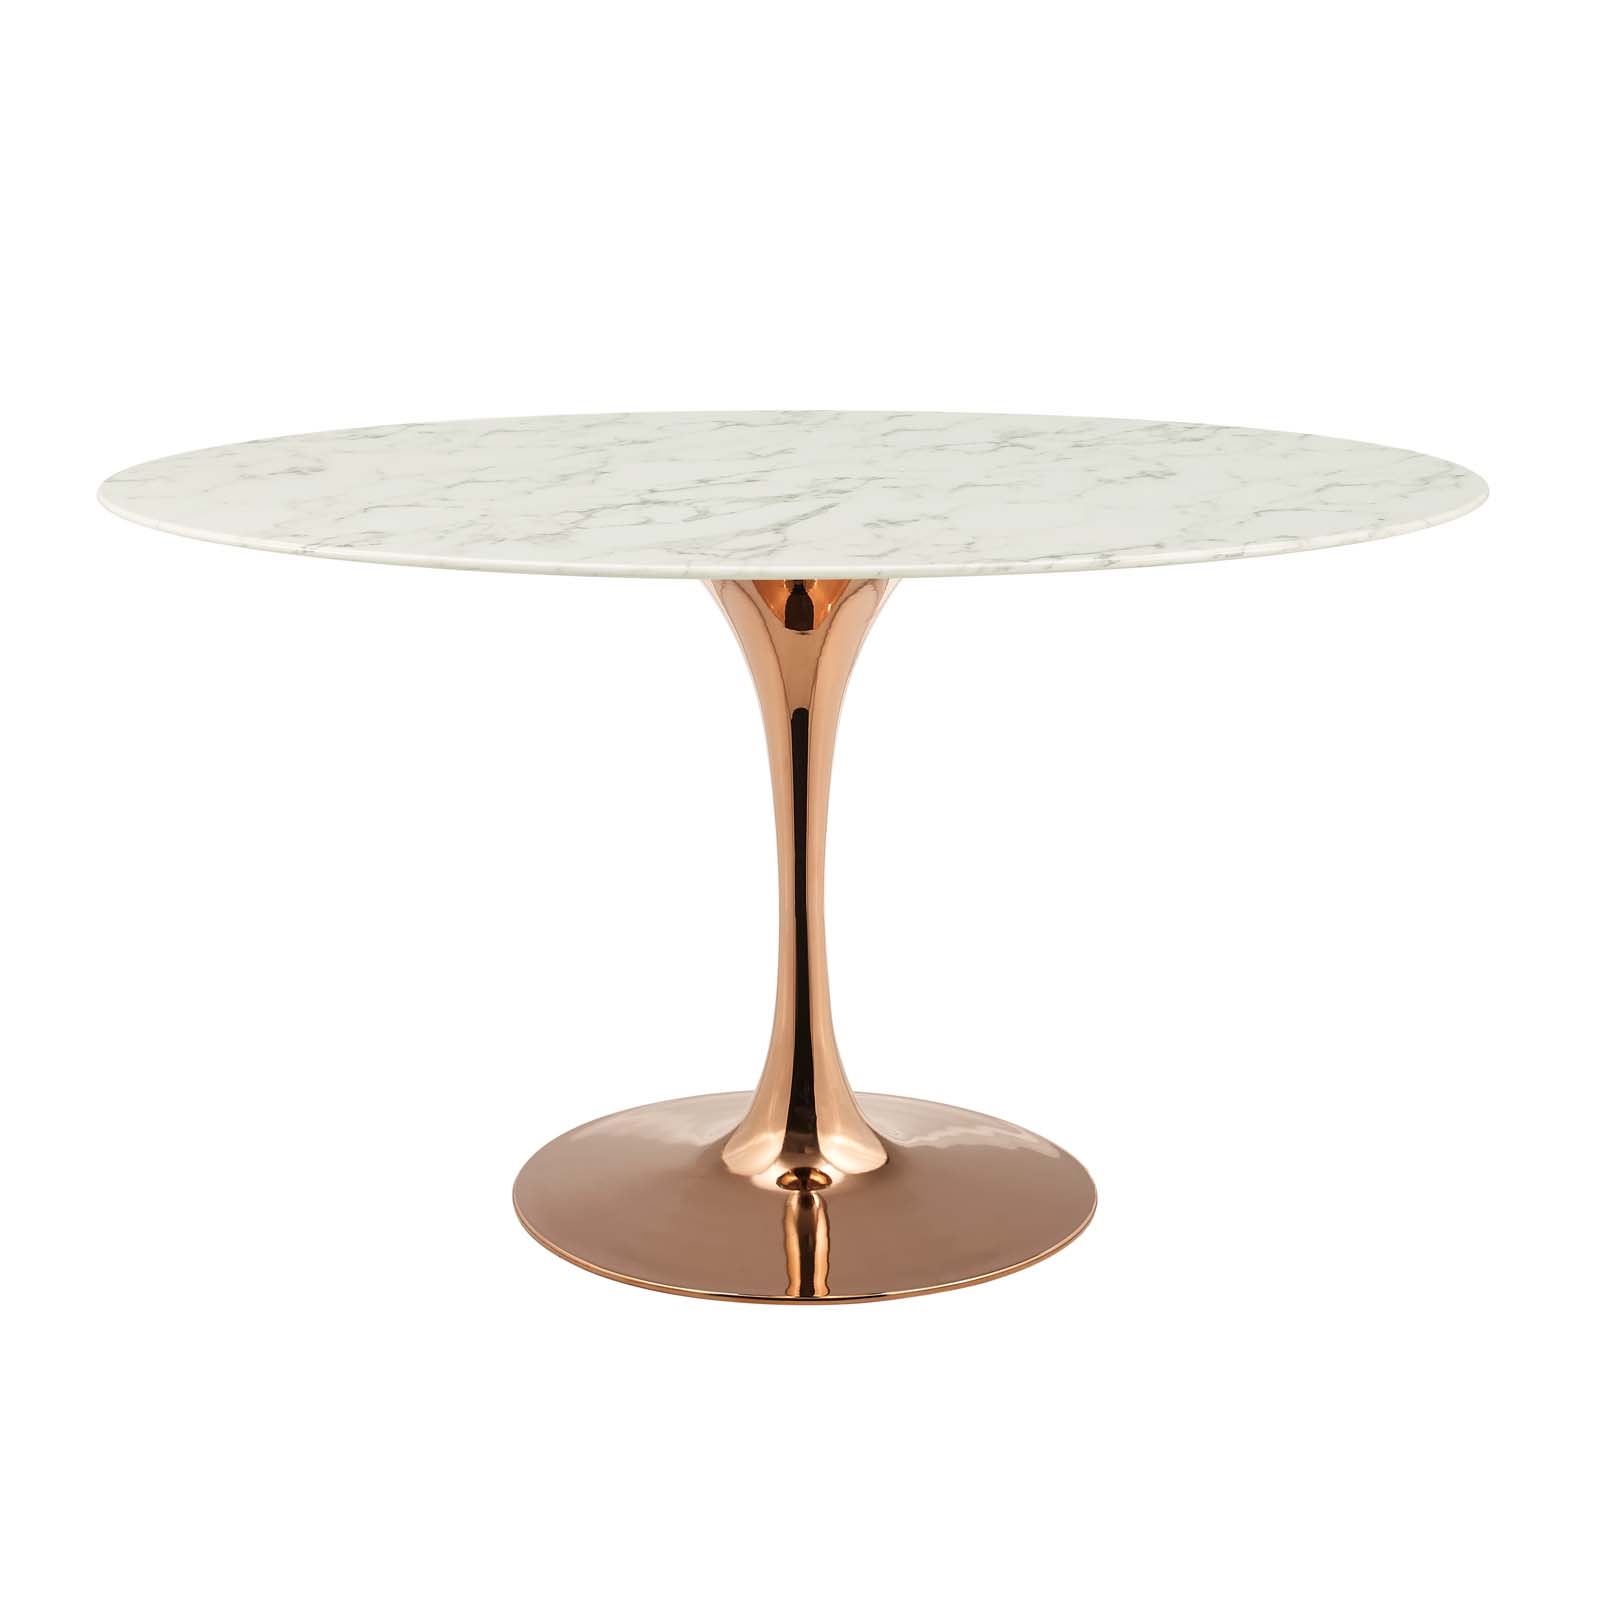 Modway Lippa 54" Oval Artificial Marble Dining Table - Rose White - image 1 of 4